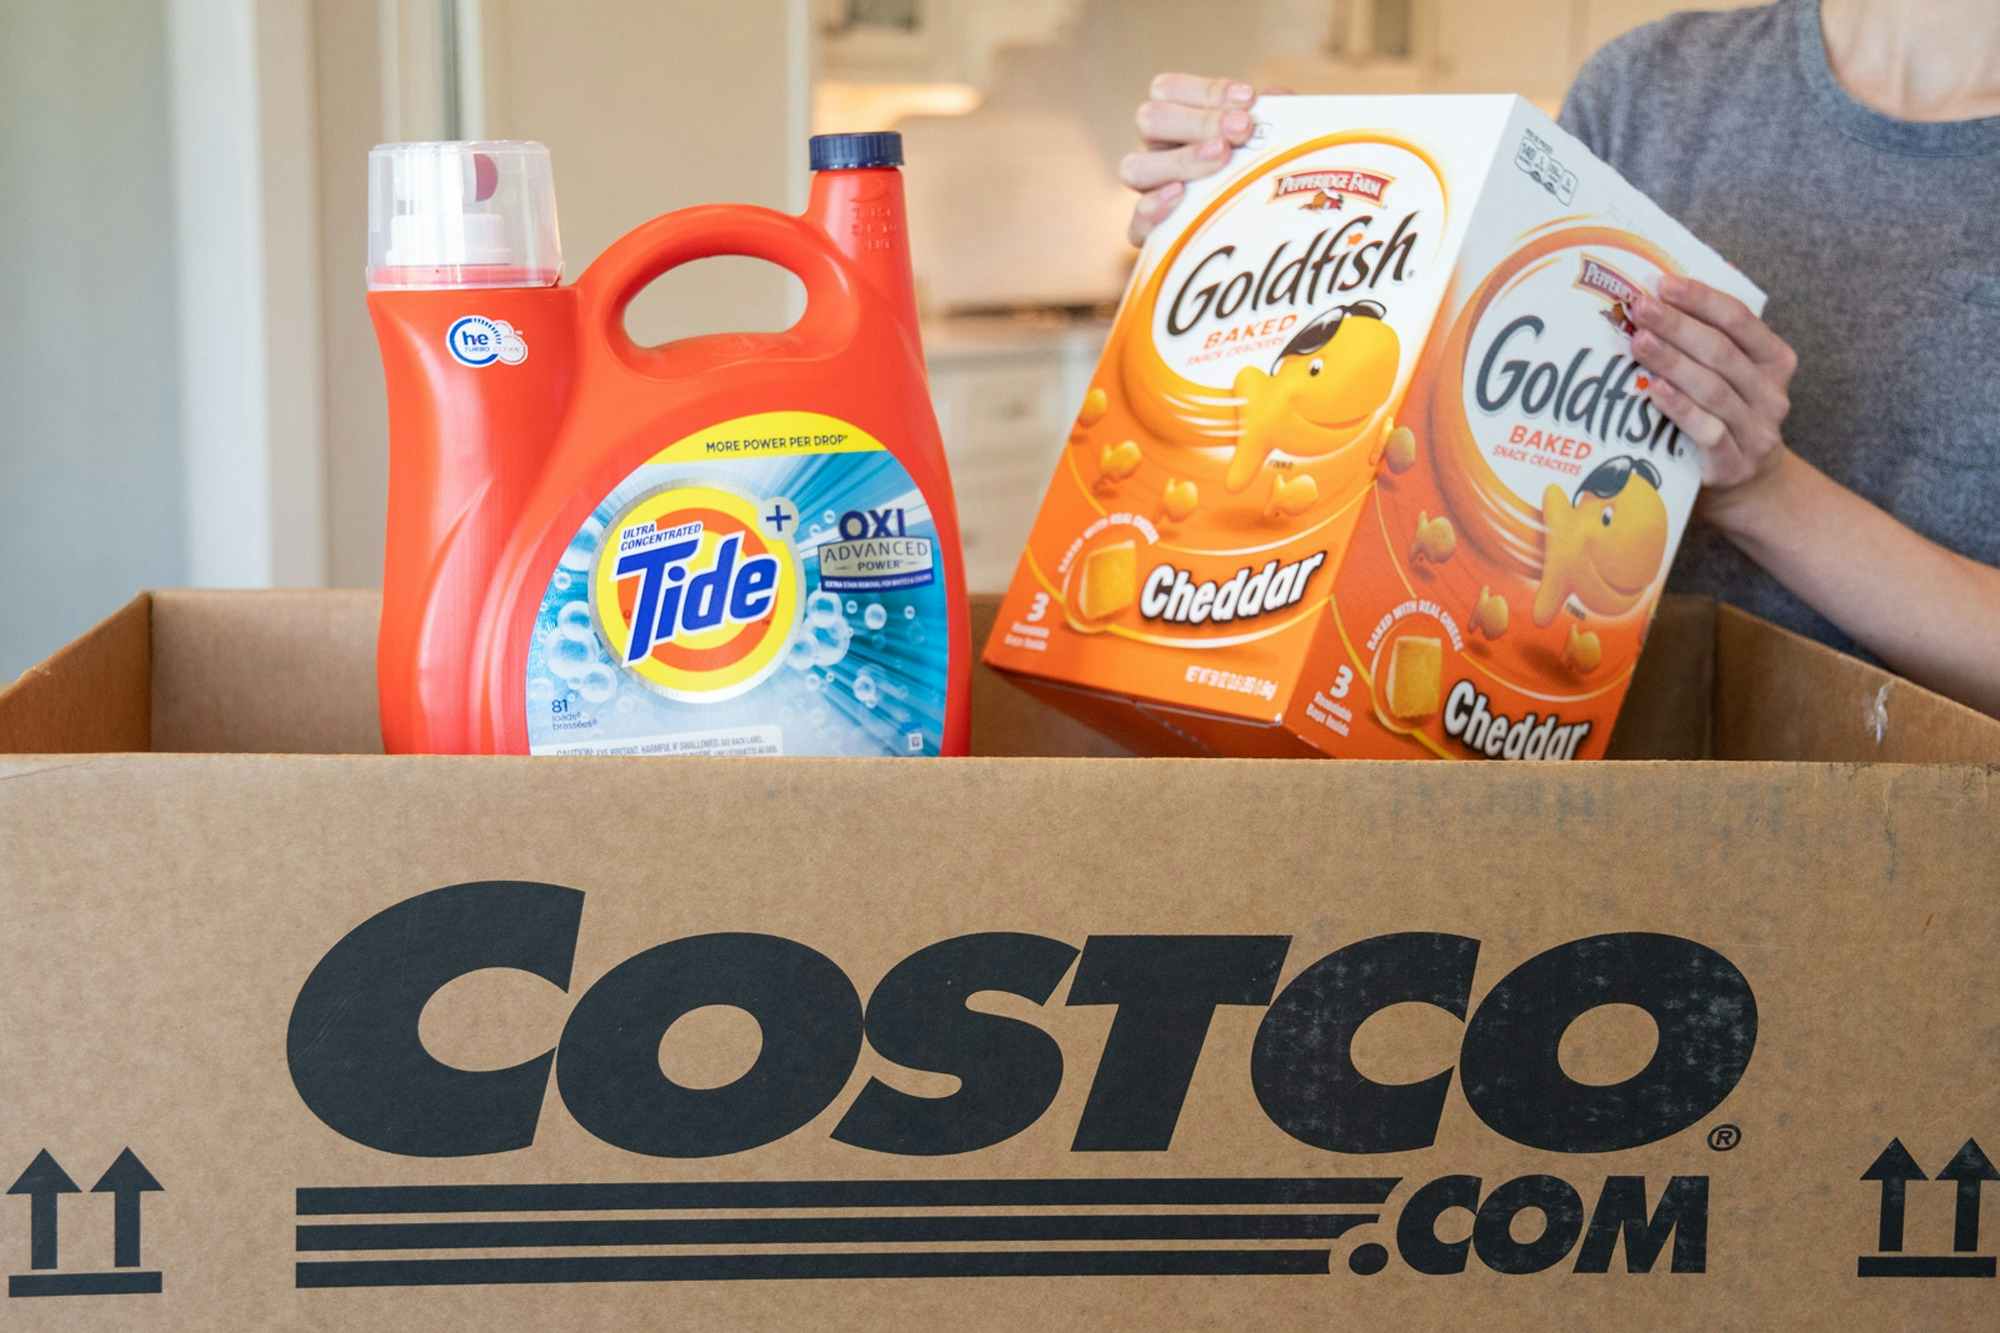 A person pulling gold fish crackers and tide from a Costco.com shipping box.